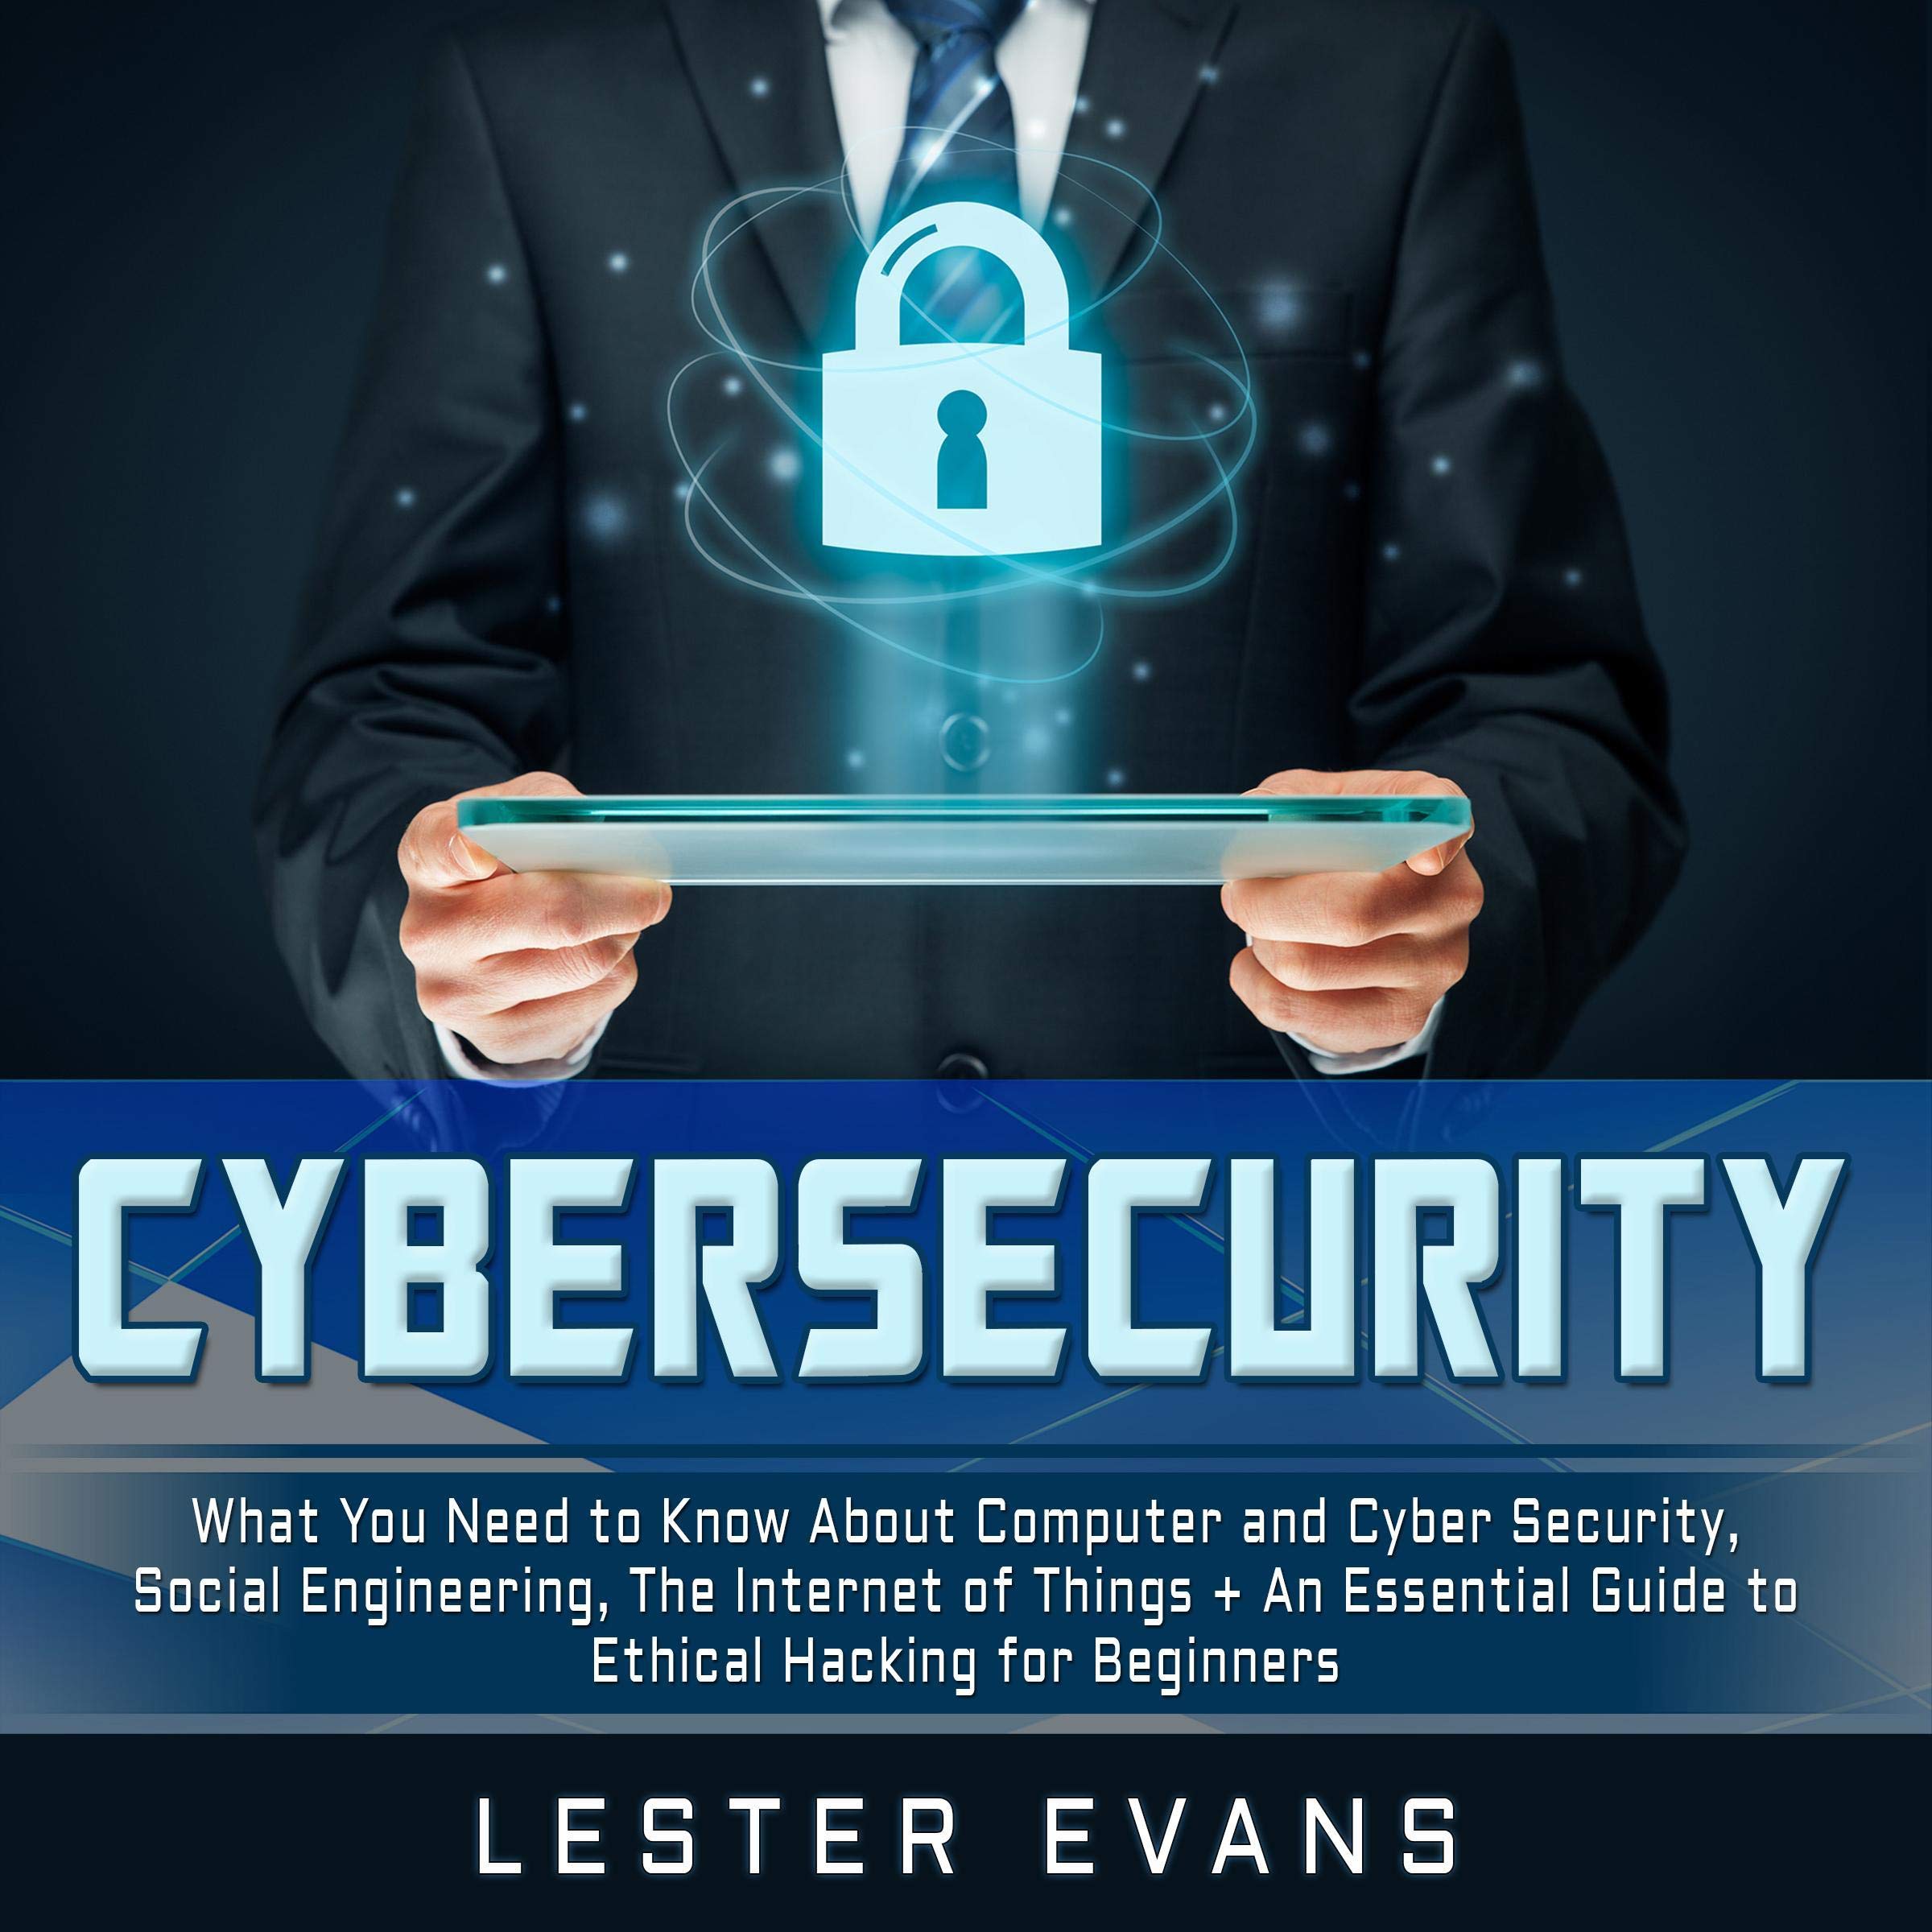 Cybersecurity: What You Need to Know About Computer and Cyber Security, Social Engineering, the Internet of Things + An Essential Guide to Ethical Hacking for Beginners